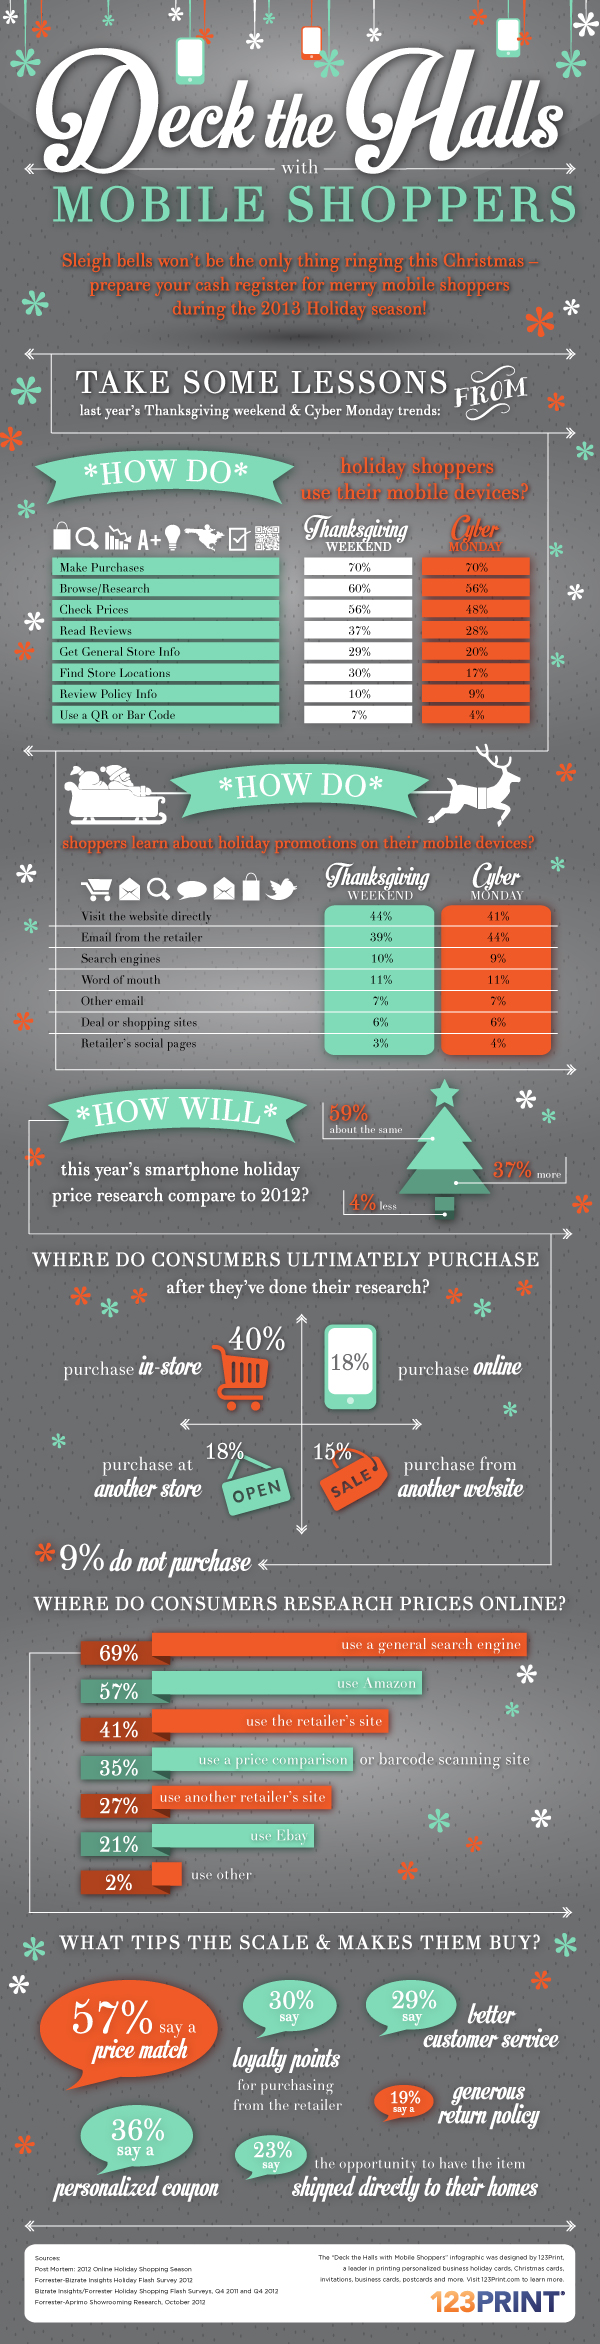 123Print Infographic Deck the Halls with Mobile Shoppers